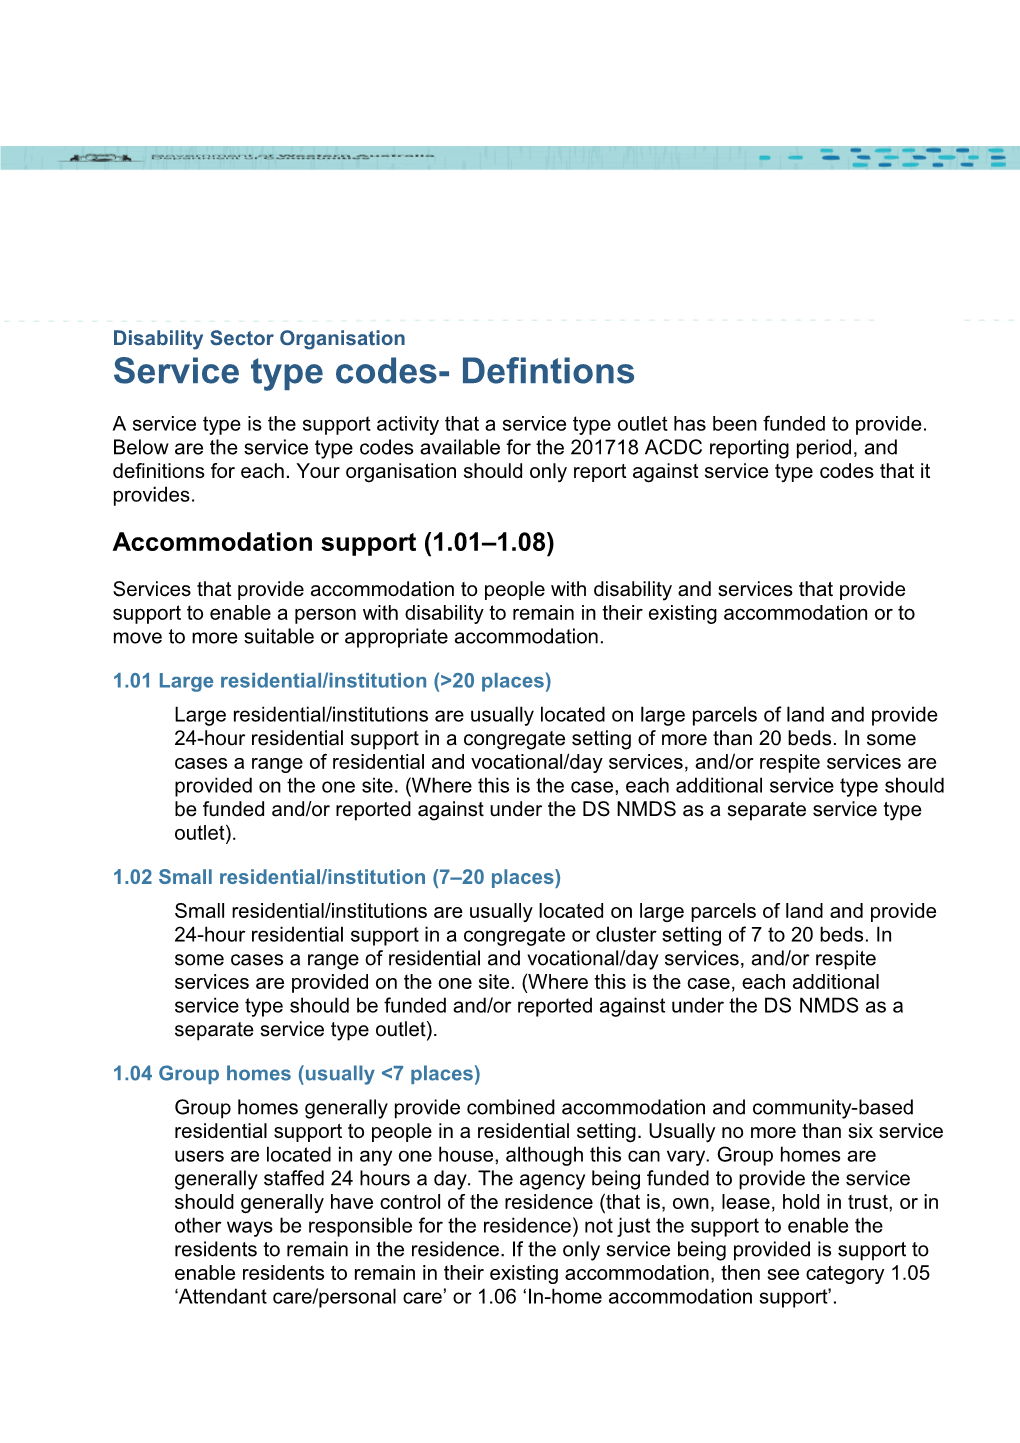 Service Type Codes- Defintions